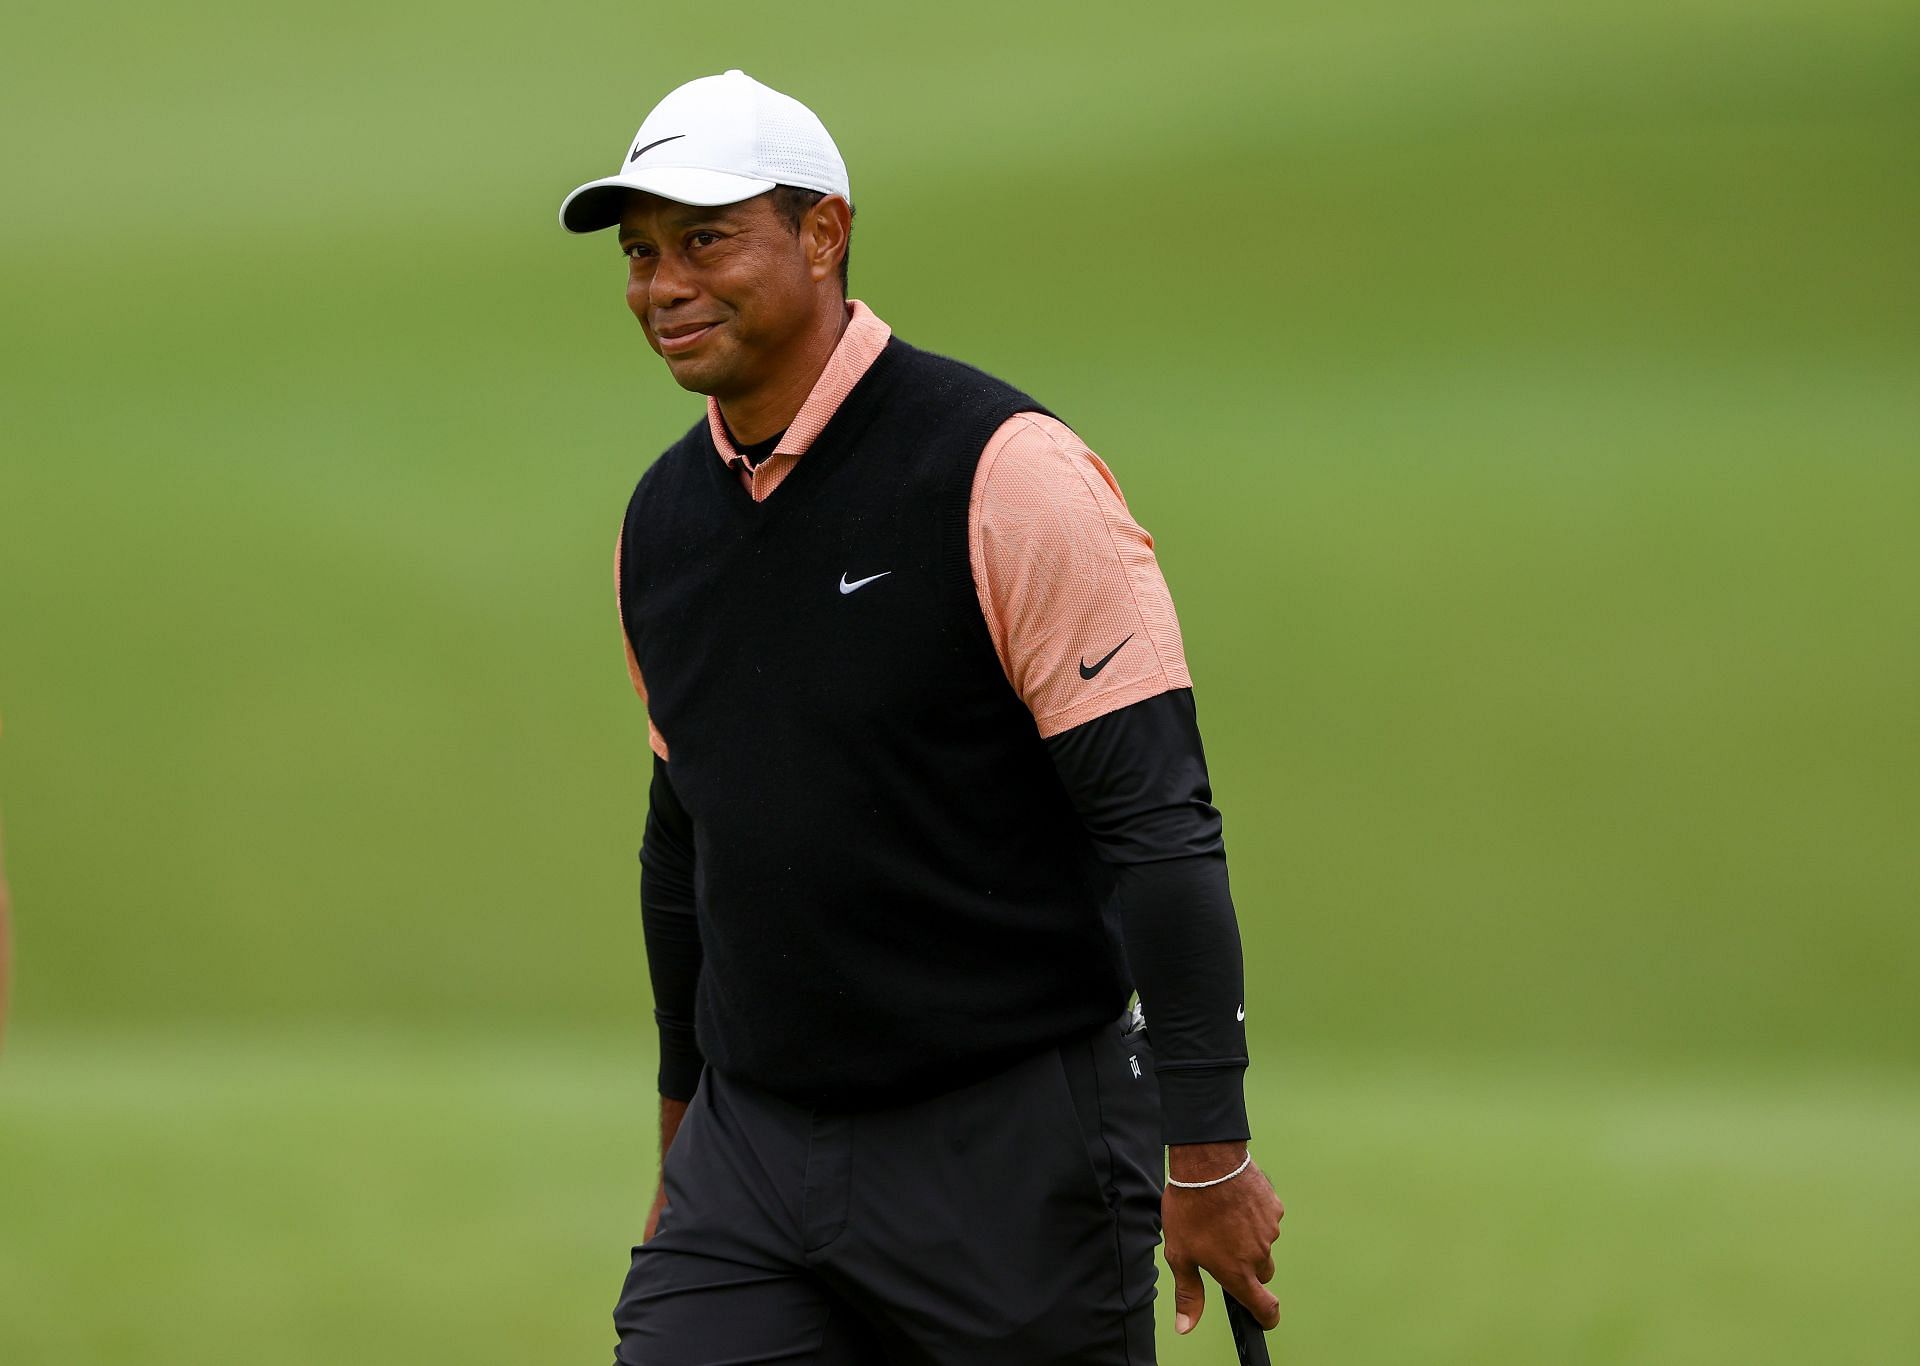 Why did Tiger Woods withdraw from the PGA Championship & skip the US Open?